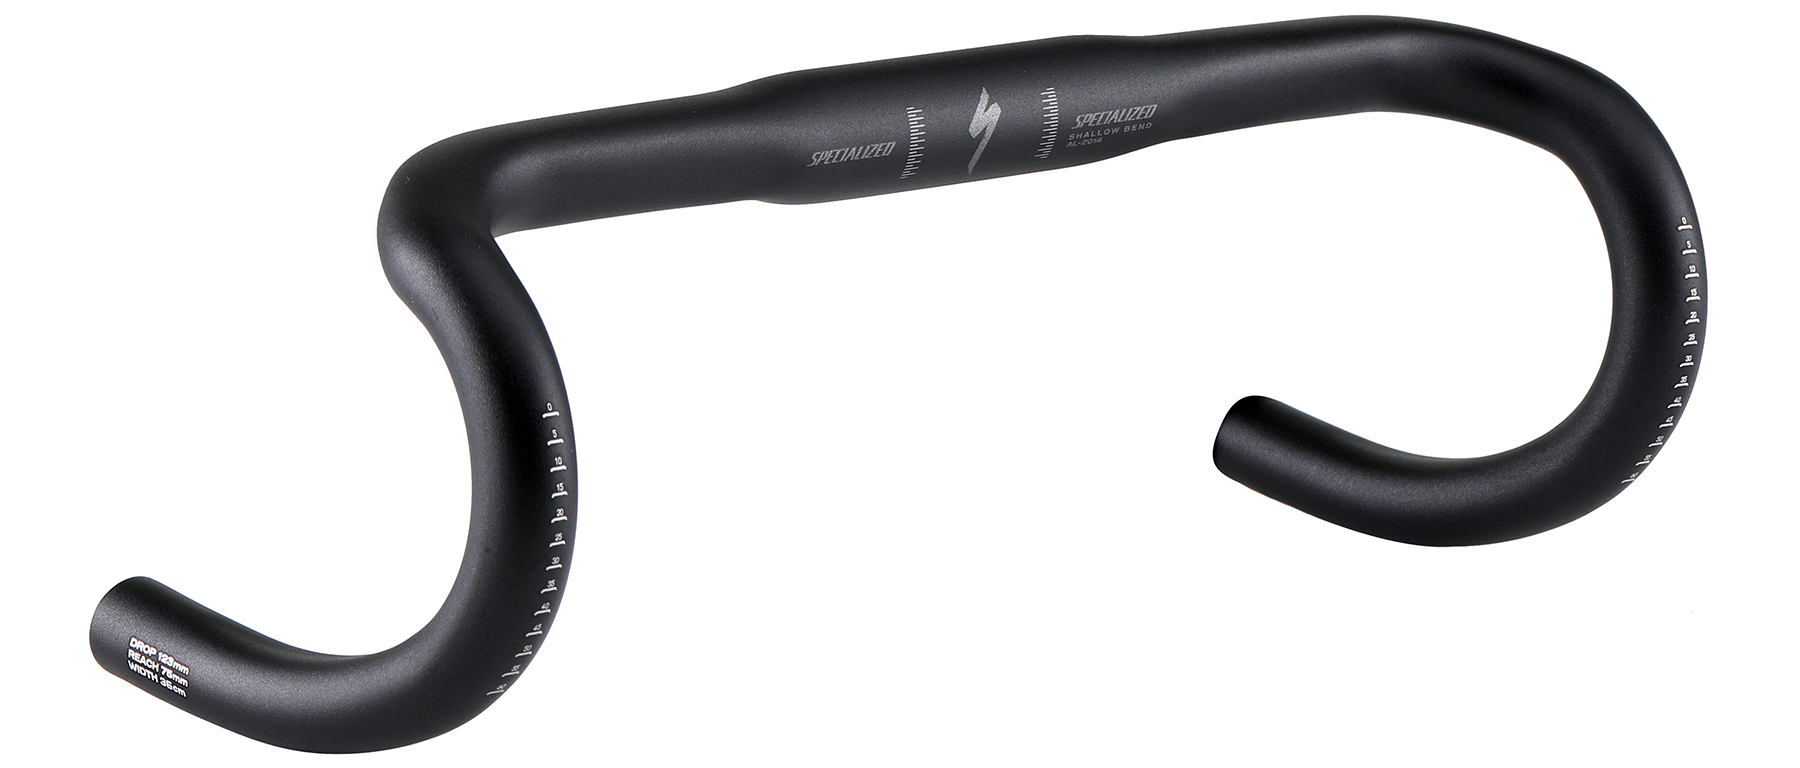 Specialized Expert Alloy Shallow Bend Handlebar